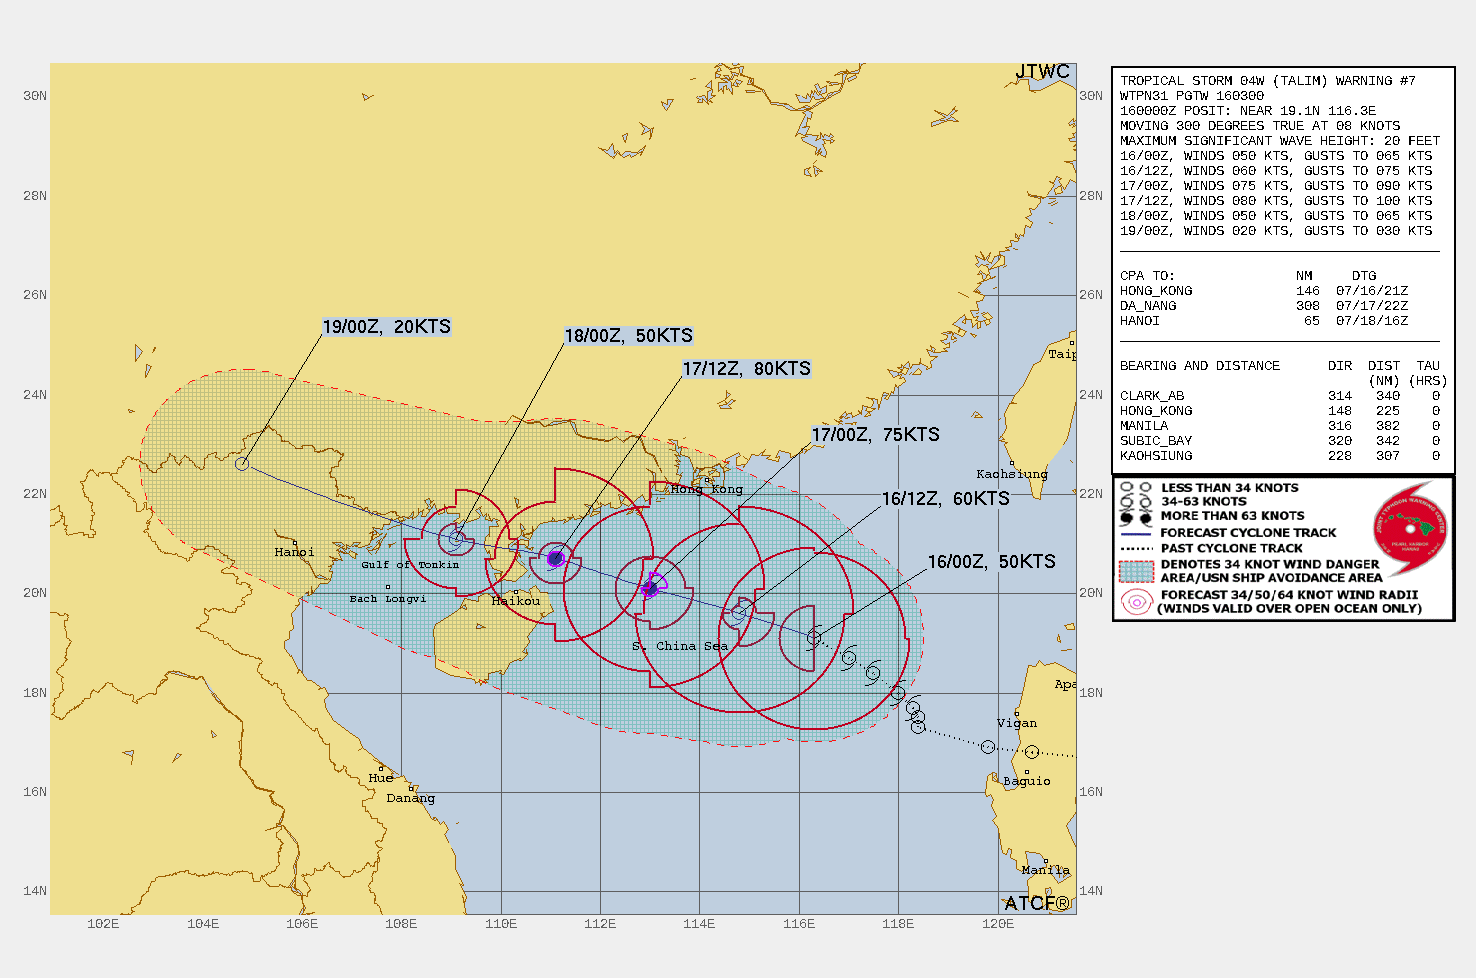 FORECAST REASONING.  SIGNIFICANT FORECAST CHANGES: THERE ARE NO SIGNIFICANT CHANGES TO THE FORECAST FROM THE PREVIOUS WARNING.  FORECAST DISCUSSION: TS TALIM WILL CONTINUE TO TRACK GENERALLY WEST-NORTHWESTWARD UNDER THE STEERING INFLUENCE OF THE STR OVER THE WARM SCS, MAKE LANDFALL ON THE LEIZHOU PENINSULA NEAR ZHANJIANG AFTER TAU 36, THEN CROSS THE GULF OF TONKIN BEFORE MAKING A FINAL LANDFALL OVER NORTHERN VIETNAM AROUND TAU 54. THE OVERALL FAVORABLE ENVIRONMENT WILL FUEL INTENSIFICATION TO 80KTS BY TAU 36 PRIOR TO INITIAL LANDFALL. LAND INTERACTION WITH RUGGED TERRAIN AND INCREASING VWS WILL MOSTLY BE RESPONSIBLE FOR THE GRADUAL THEN RAPID EROSION AFTER TAU 36, LEADING TO DISSIPATION BY TAU 72 AS IT TRACKS OVER NORTHERN VIETNAM.